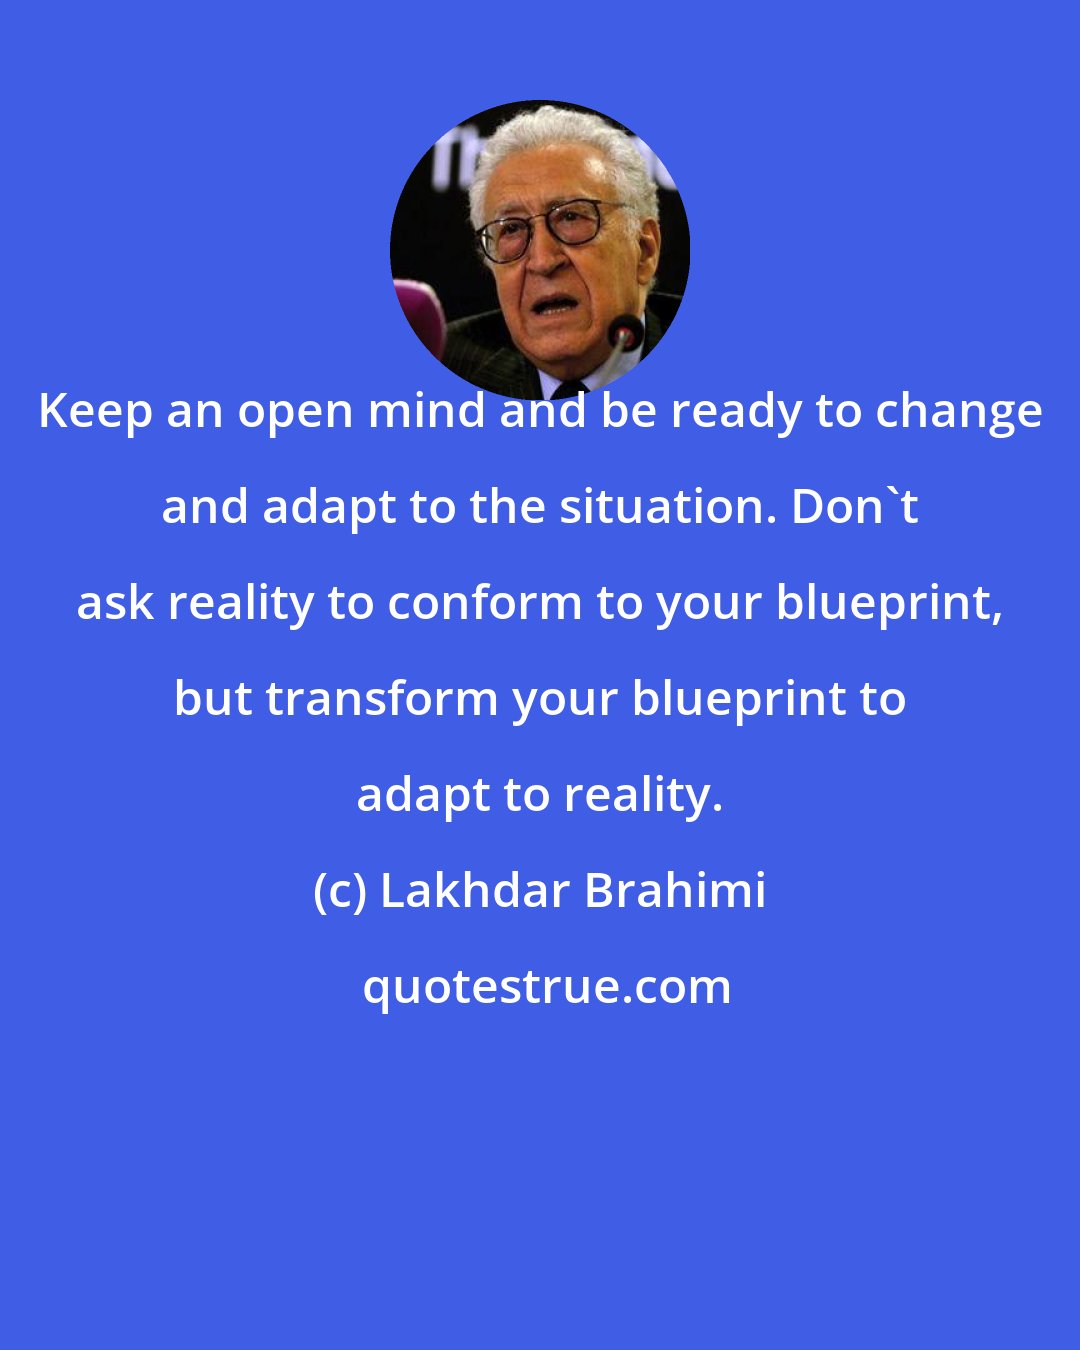 Lakhdar Brahimi: Keep an open mind and be ready to change and adapt to the situation. Don't ask reality to conform to your blueprint, but transform your blueprint to adapt to reality.